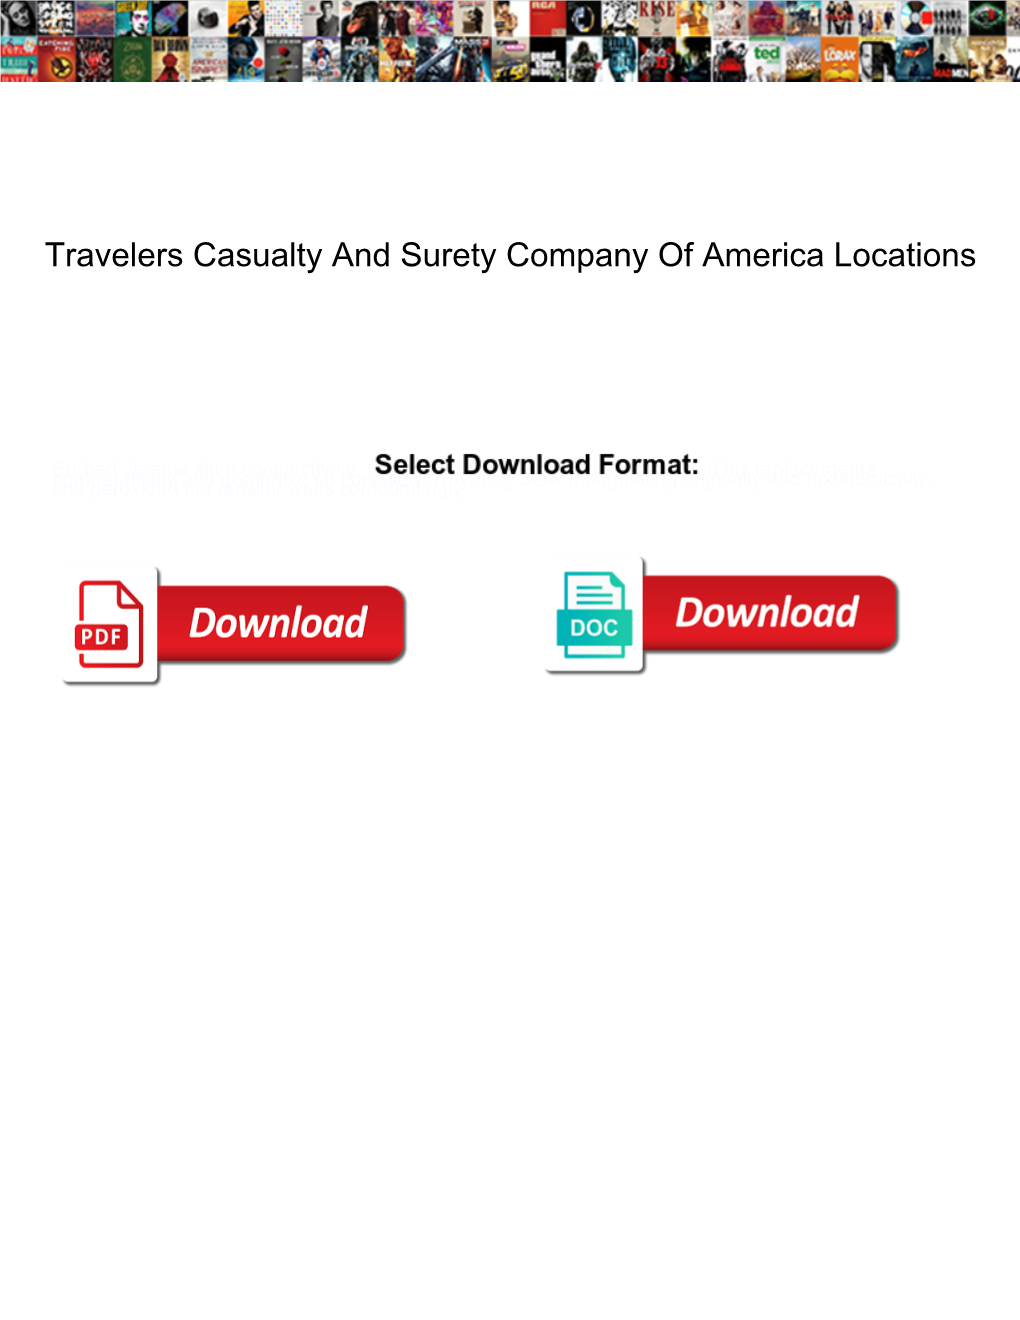 Travelers Casualty and Surety Company of America Locations